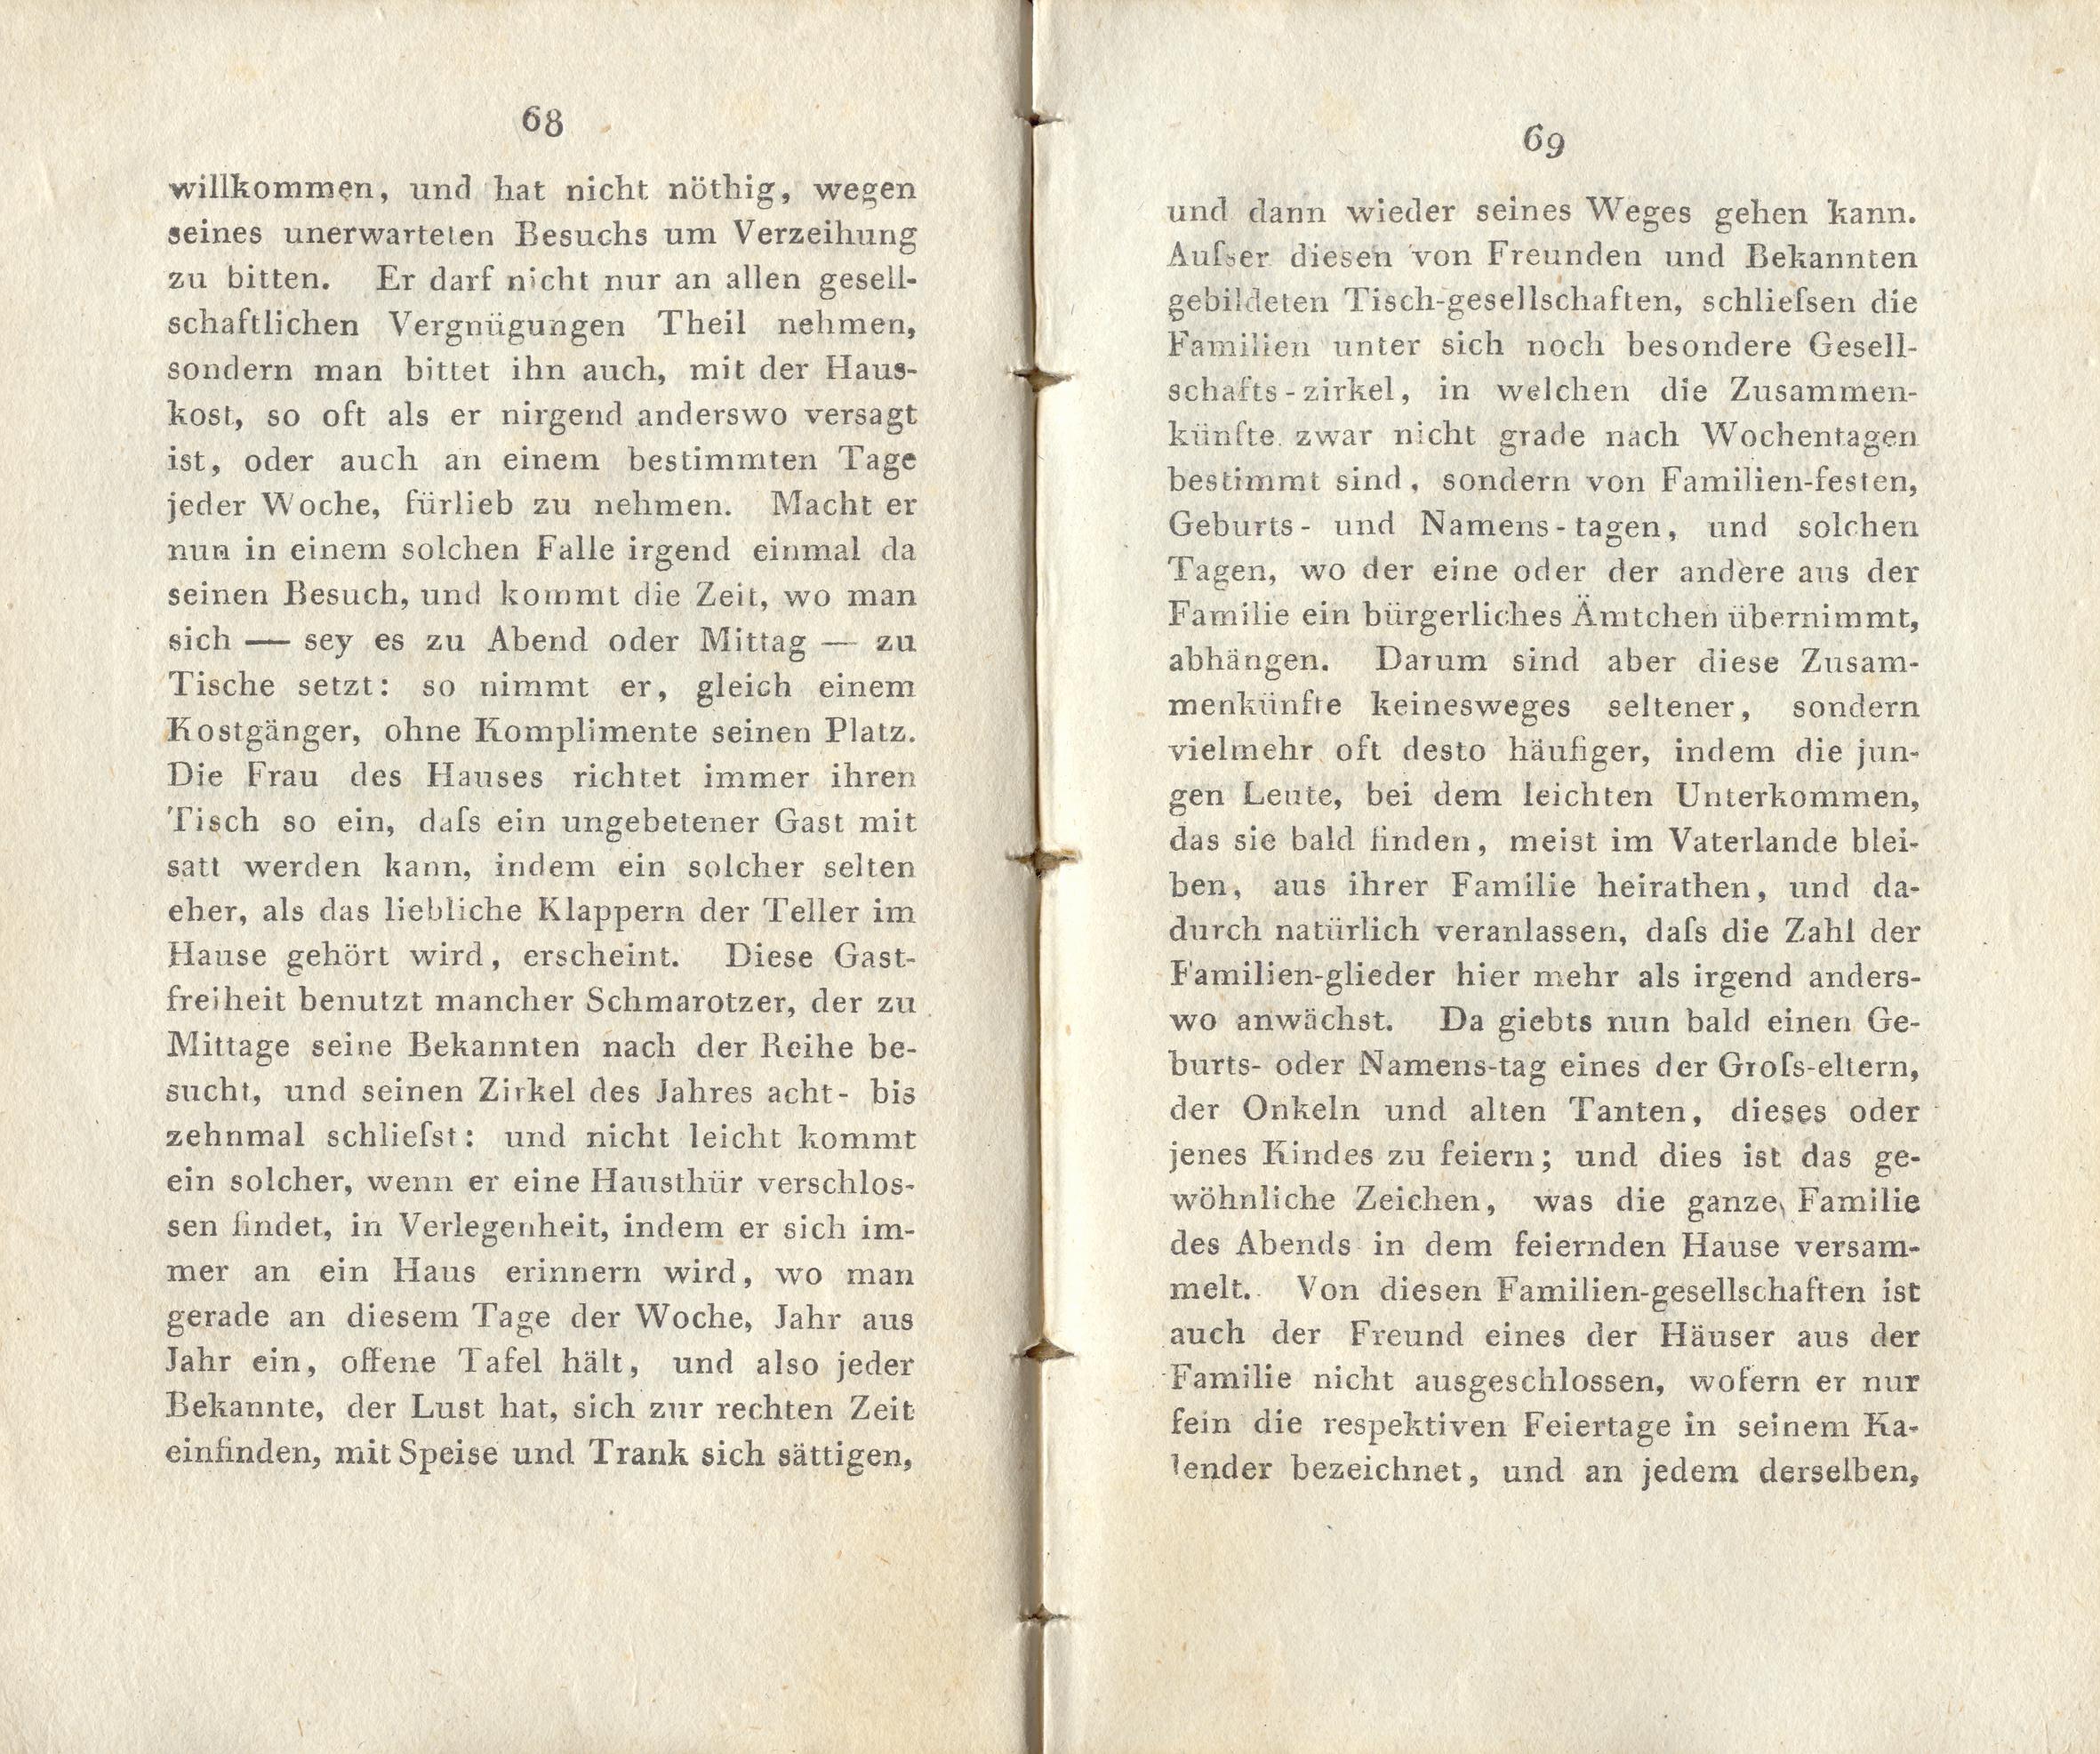 Briefe über Reval (1800) | 35. (68-69) Main body of text